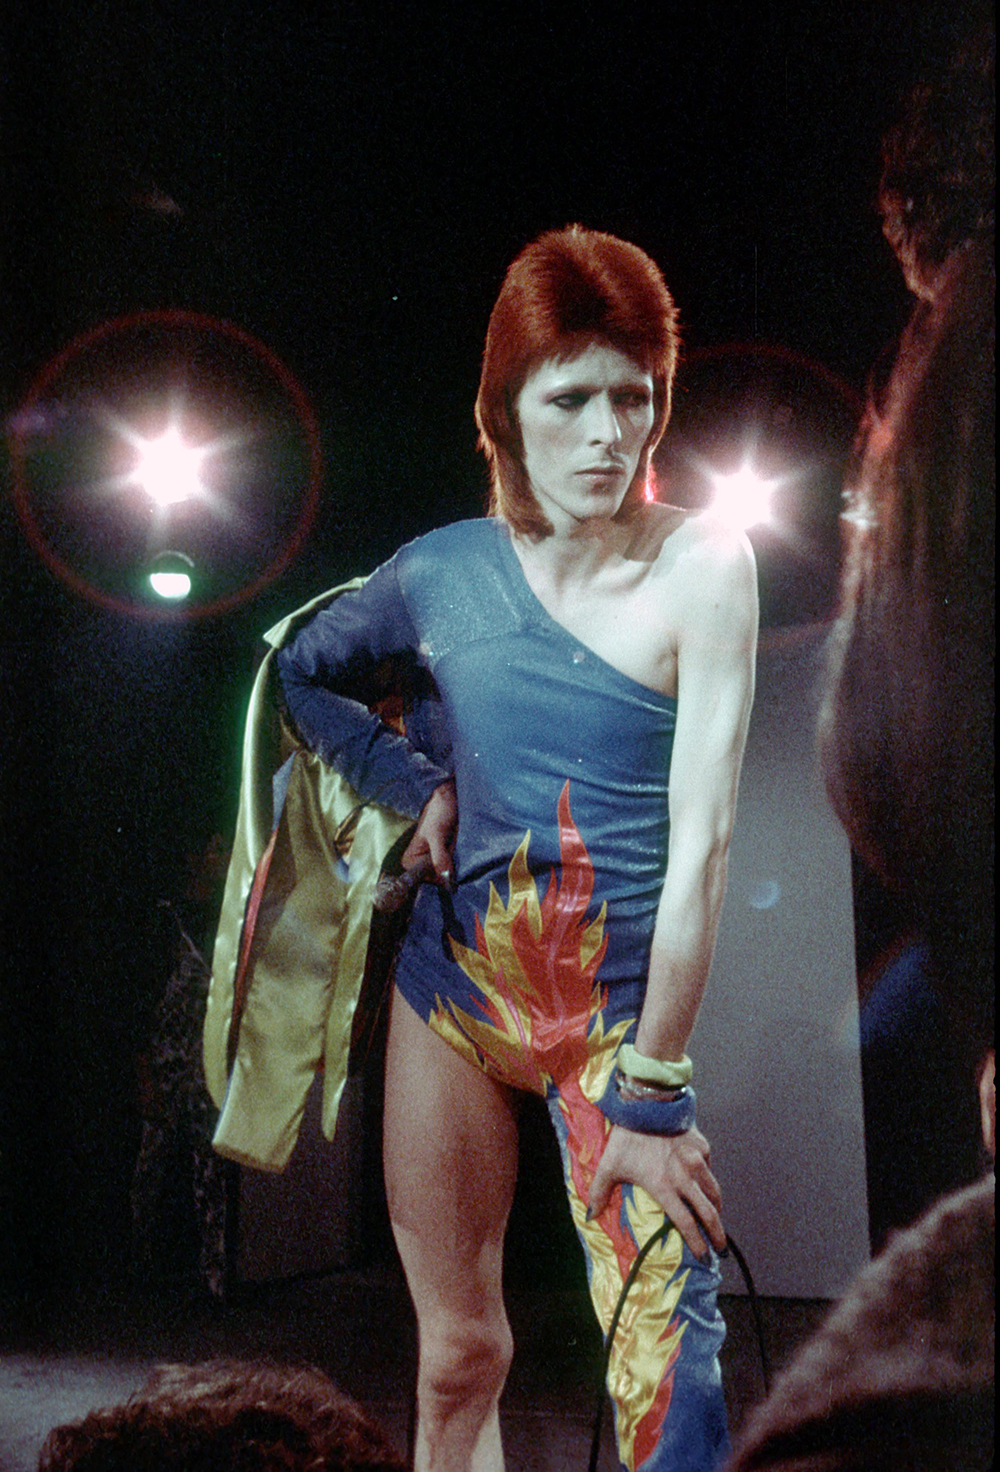 David Bowie performs as Ziggy Stardust in 1973.